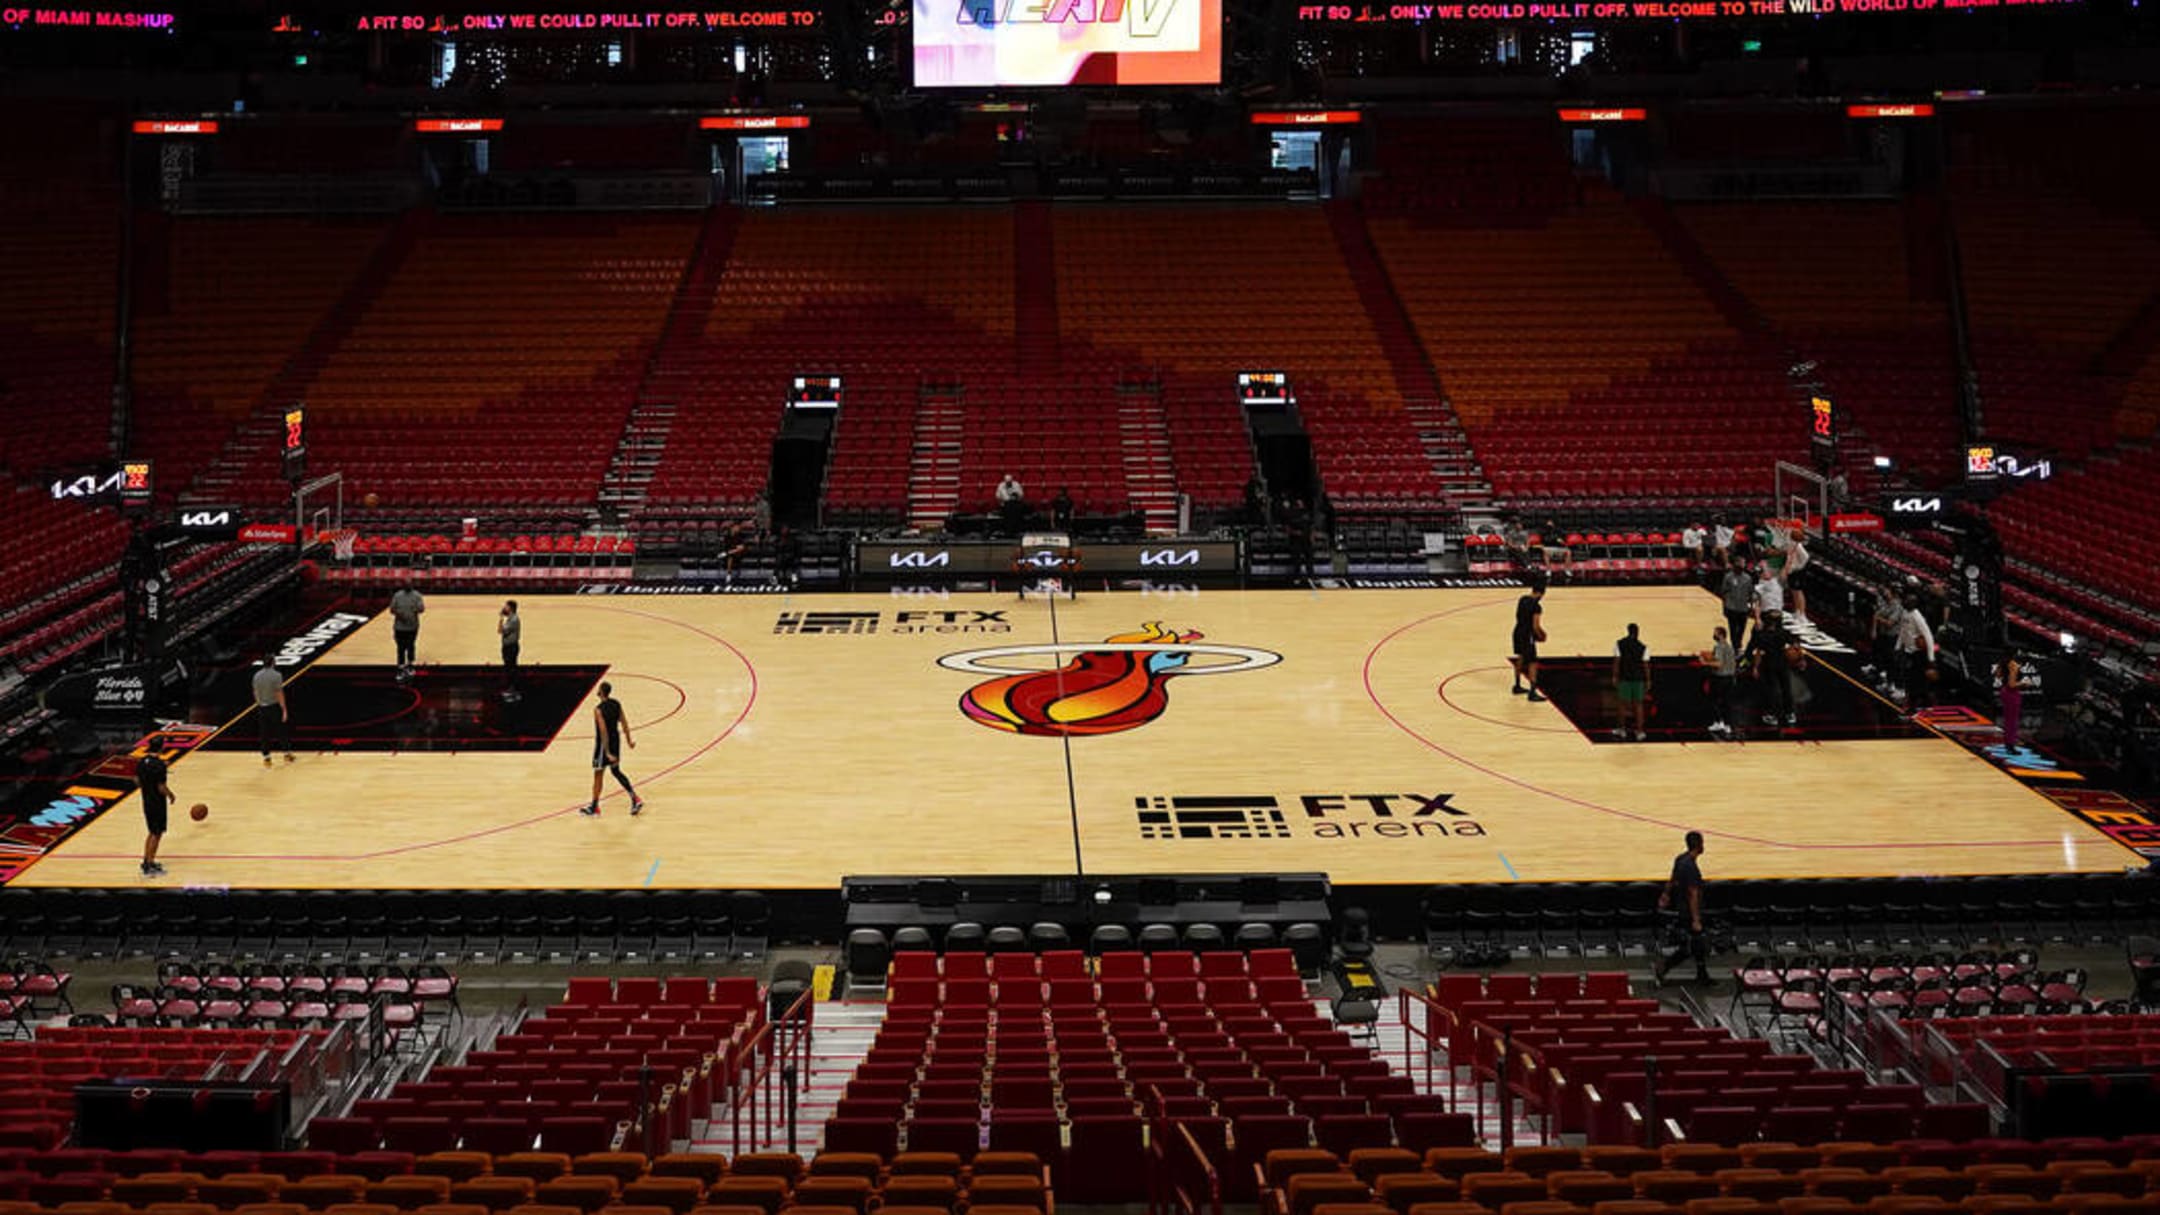 Miami-Dade Approves Deal to Rename American Airlines Arena to FTX Arena